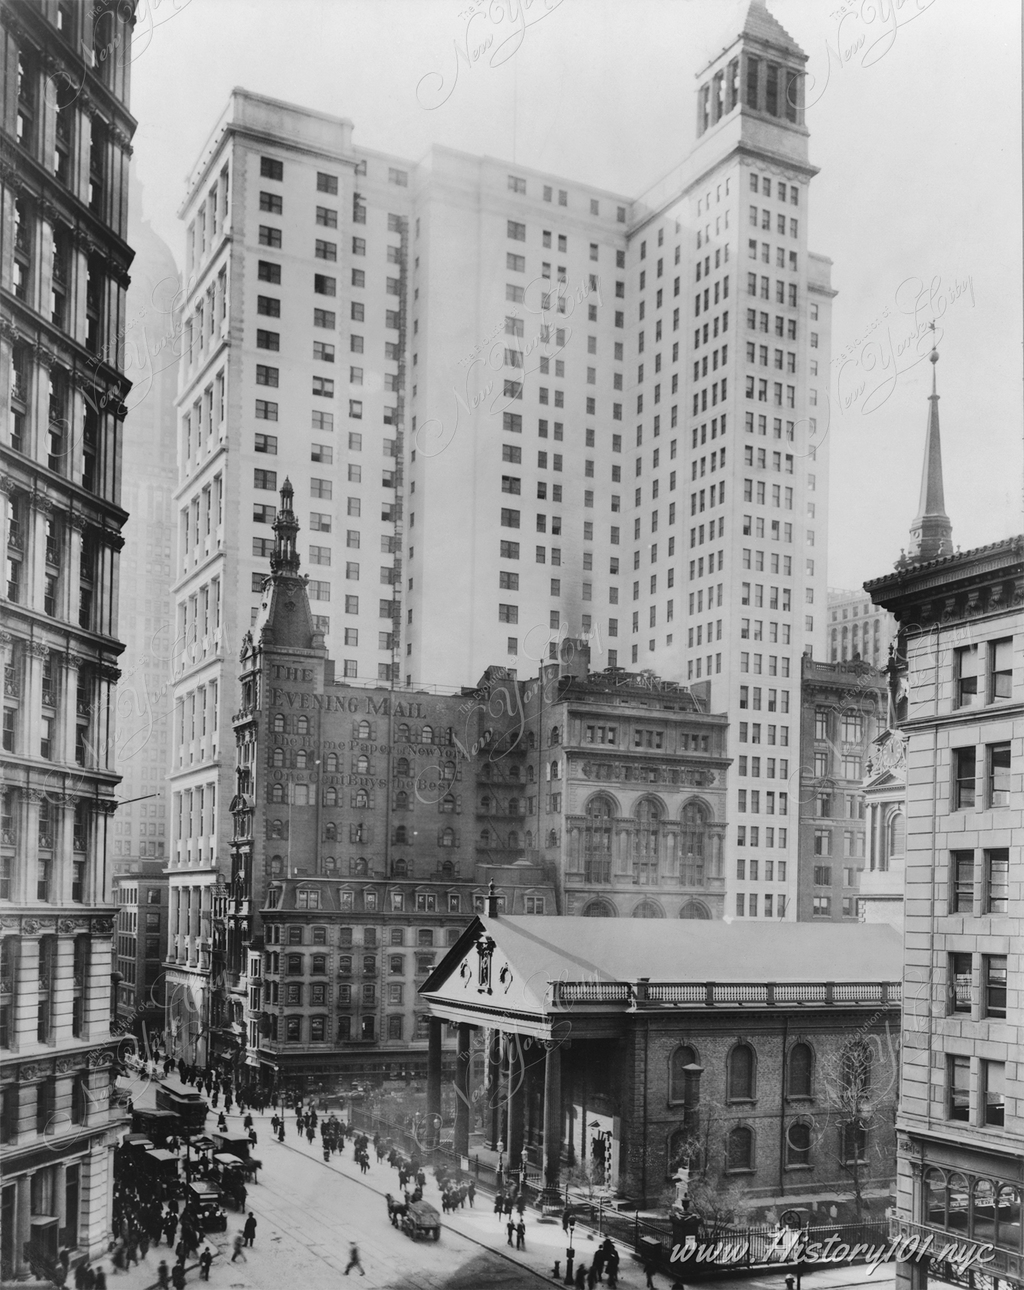 Photograph of the corner of Broadway and Fulton Street. The Telephone and Telegraph Building was designed by architect William Welles Bosworth and opened in 1916.